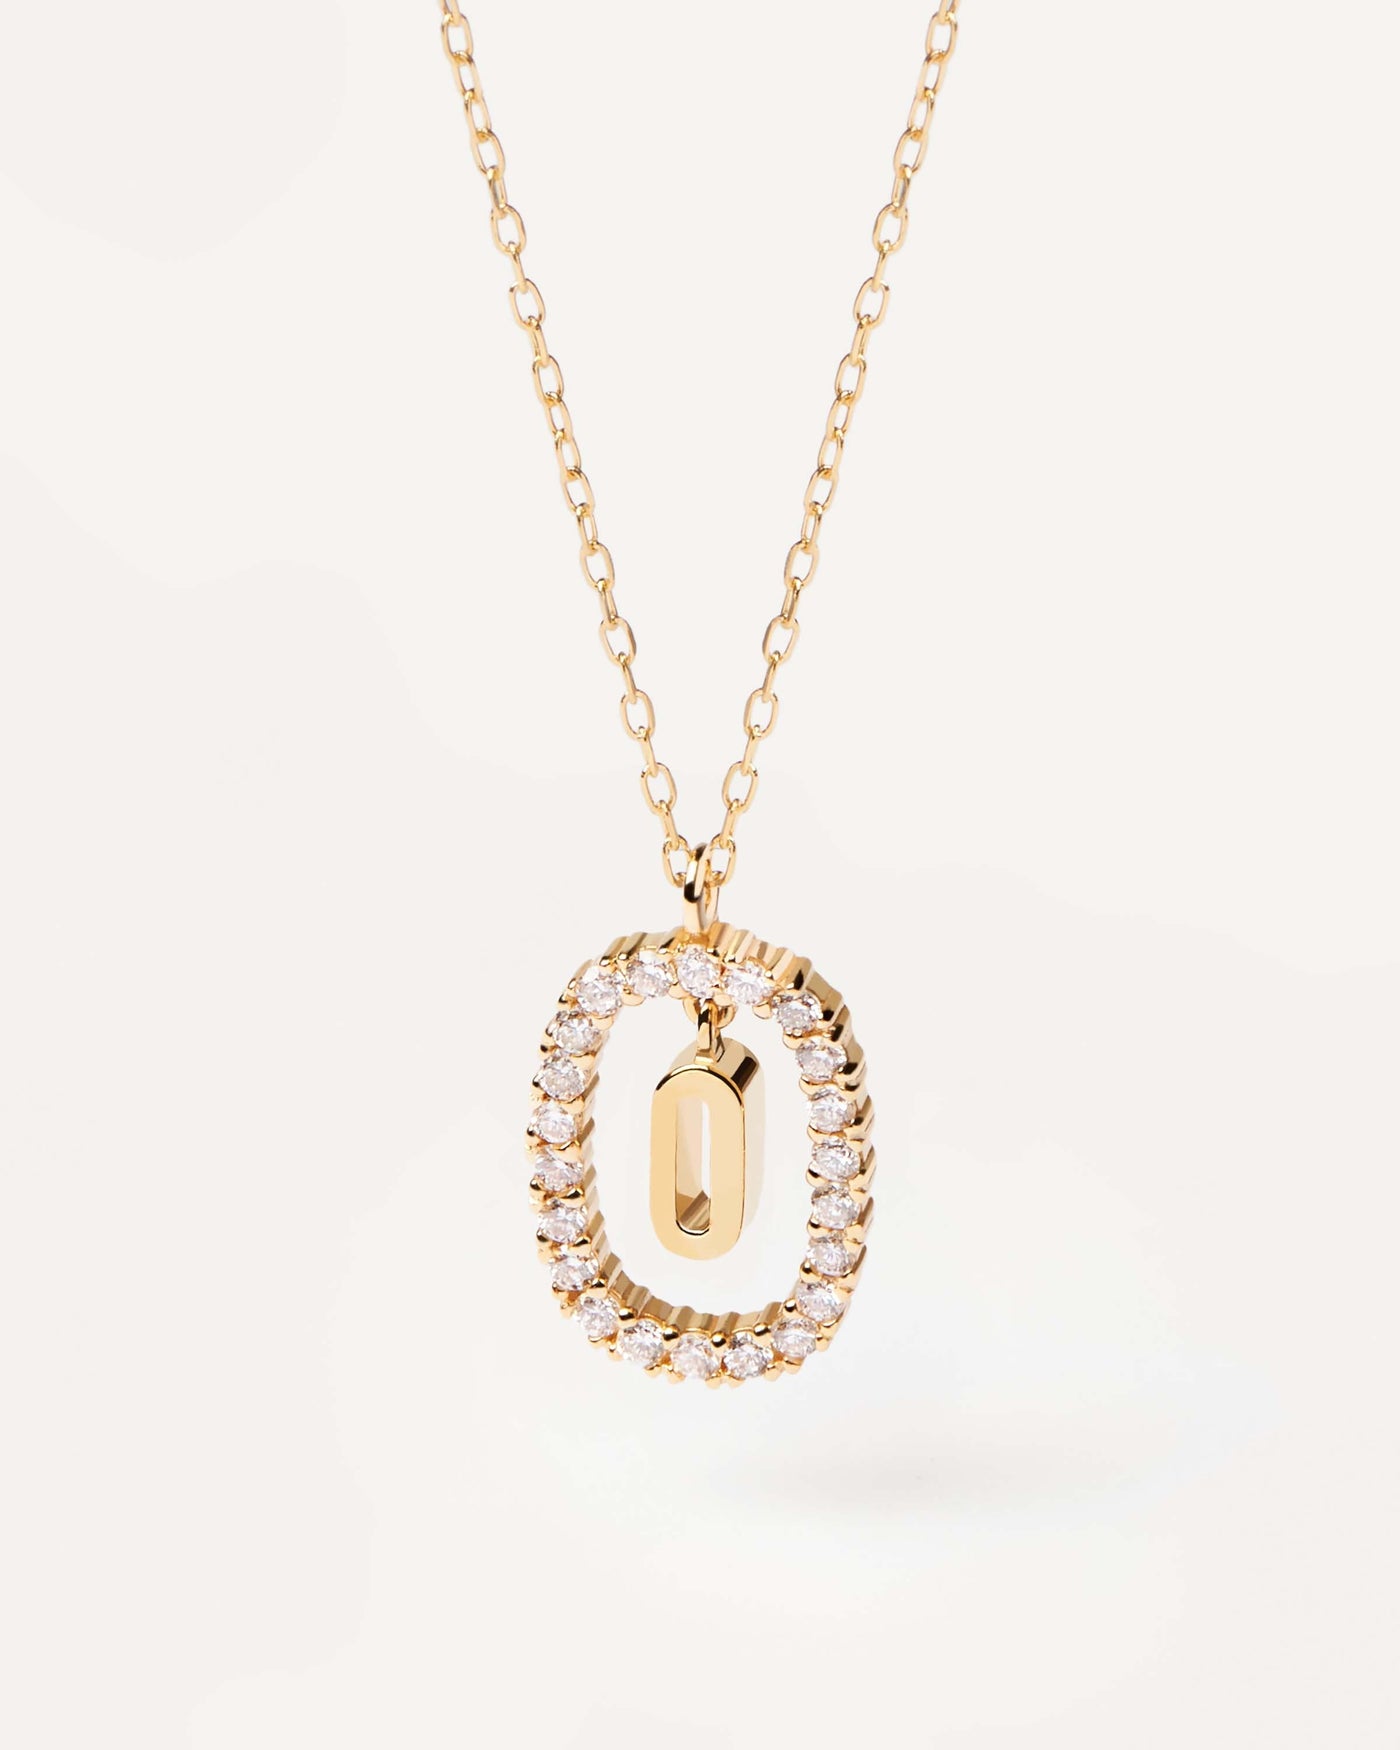 2023 Selection | Diamonds and Gold Letter O Necklace. Initial O necklace in solid yellow gold, circled by 0.33 carats lab-grown diamonds. Get the latest arrival from PDPAOLA. Place your order safely and get this Best Seller. Free Shipping.